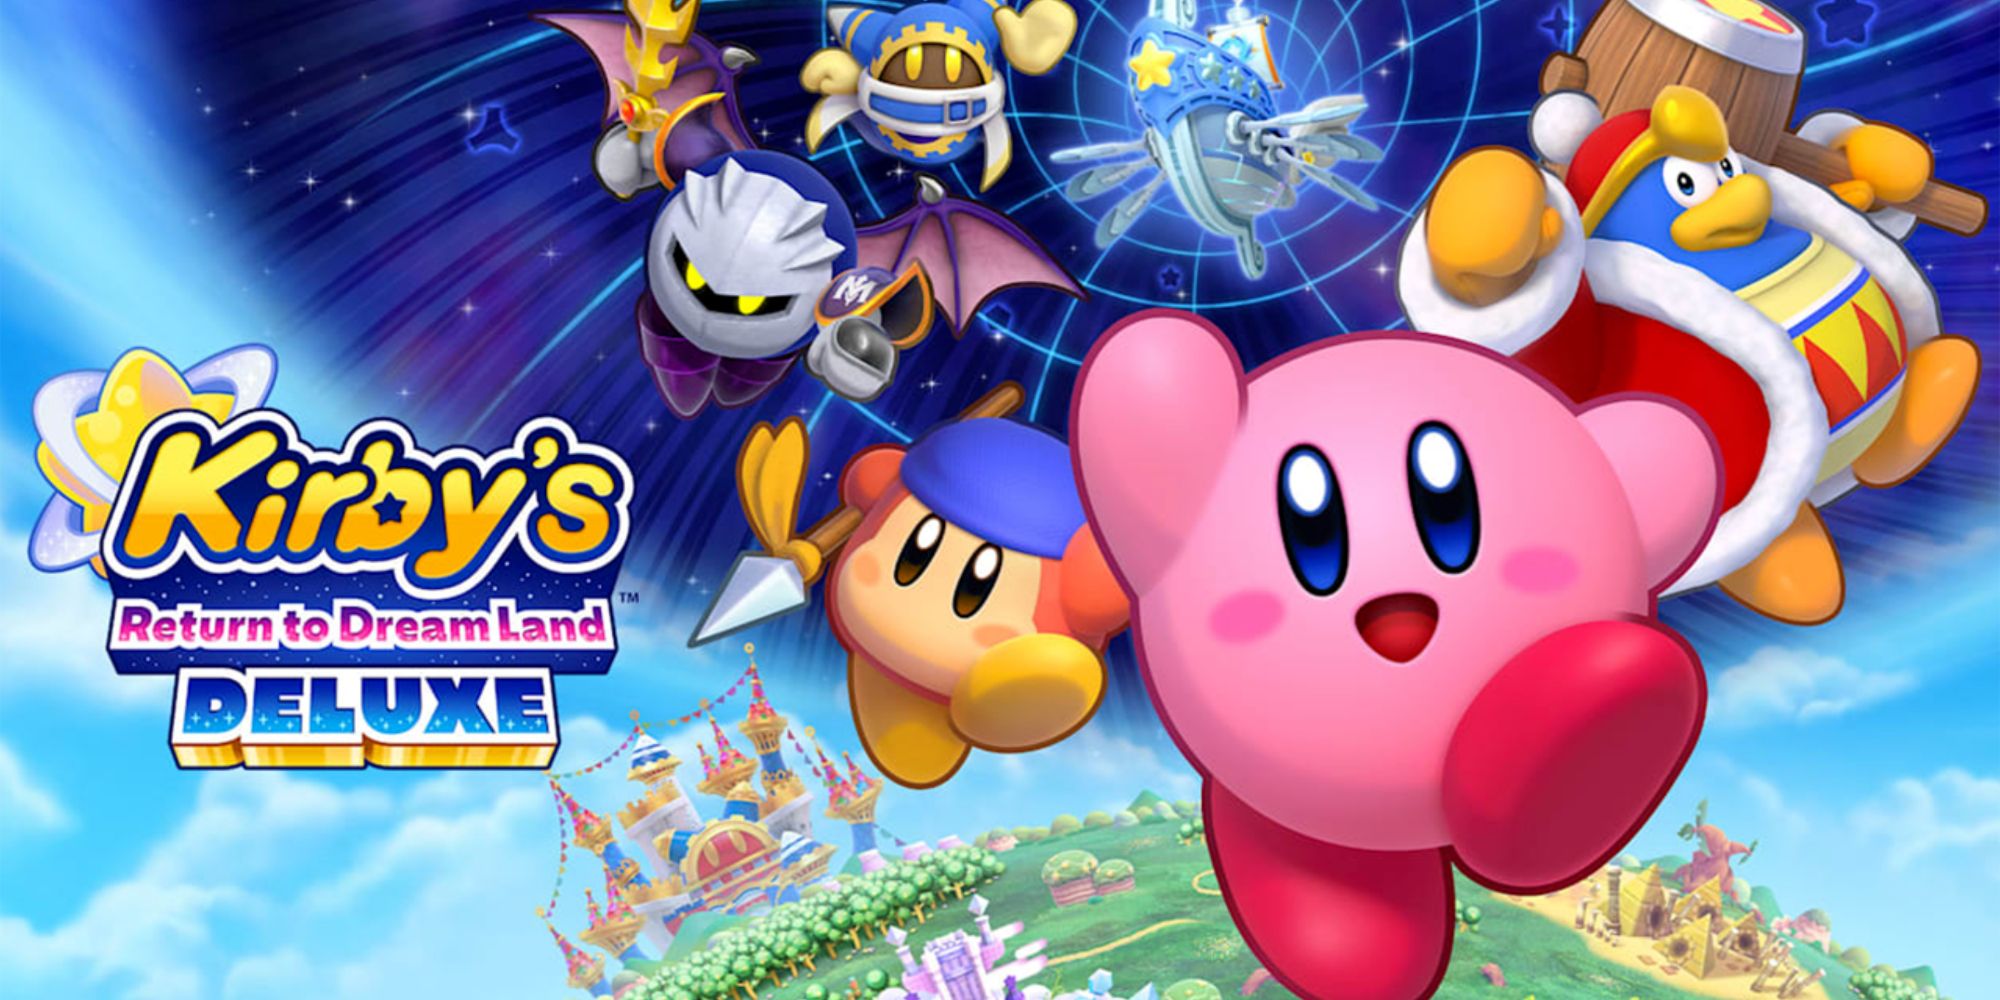 Kirby's Return To Dream Land Deluxe: Kirby jumps with his friends